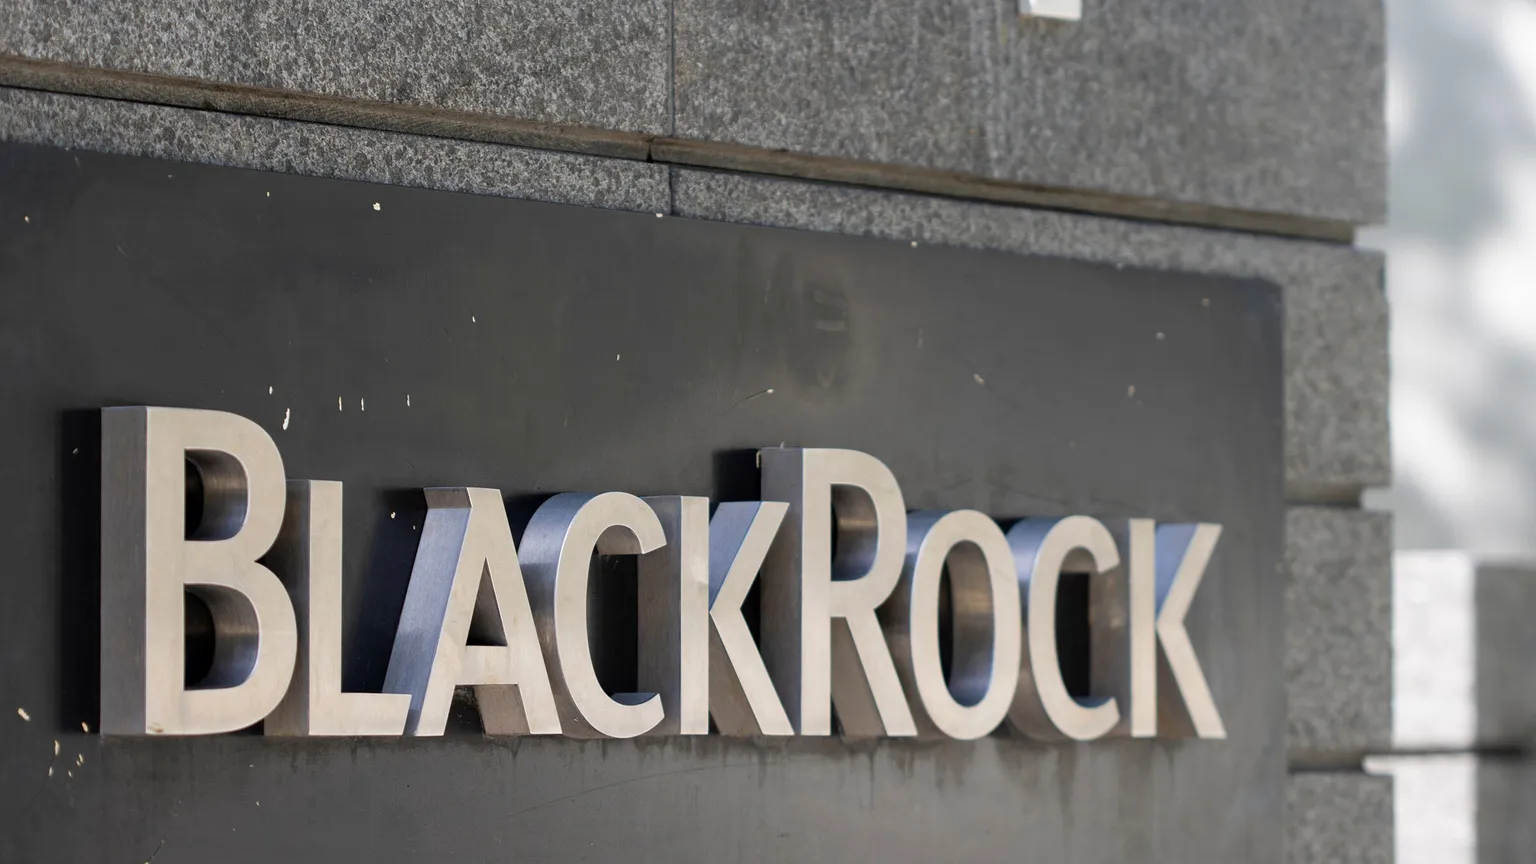 SEC Formally Accepts BlackRock Spot Bitcoin ETF Application for Review